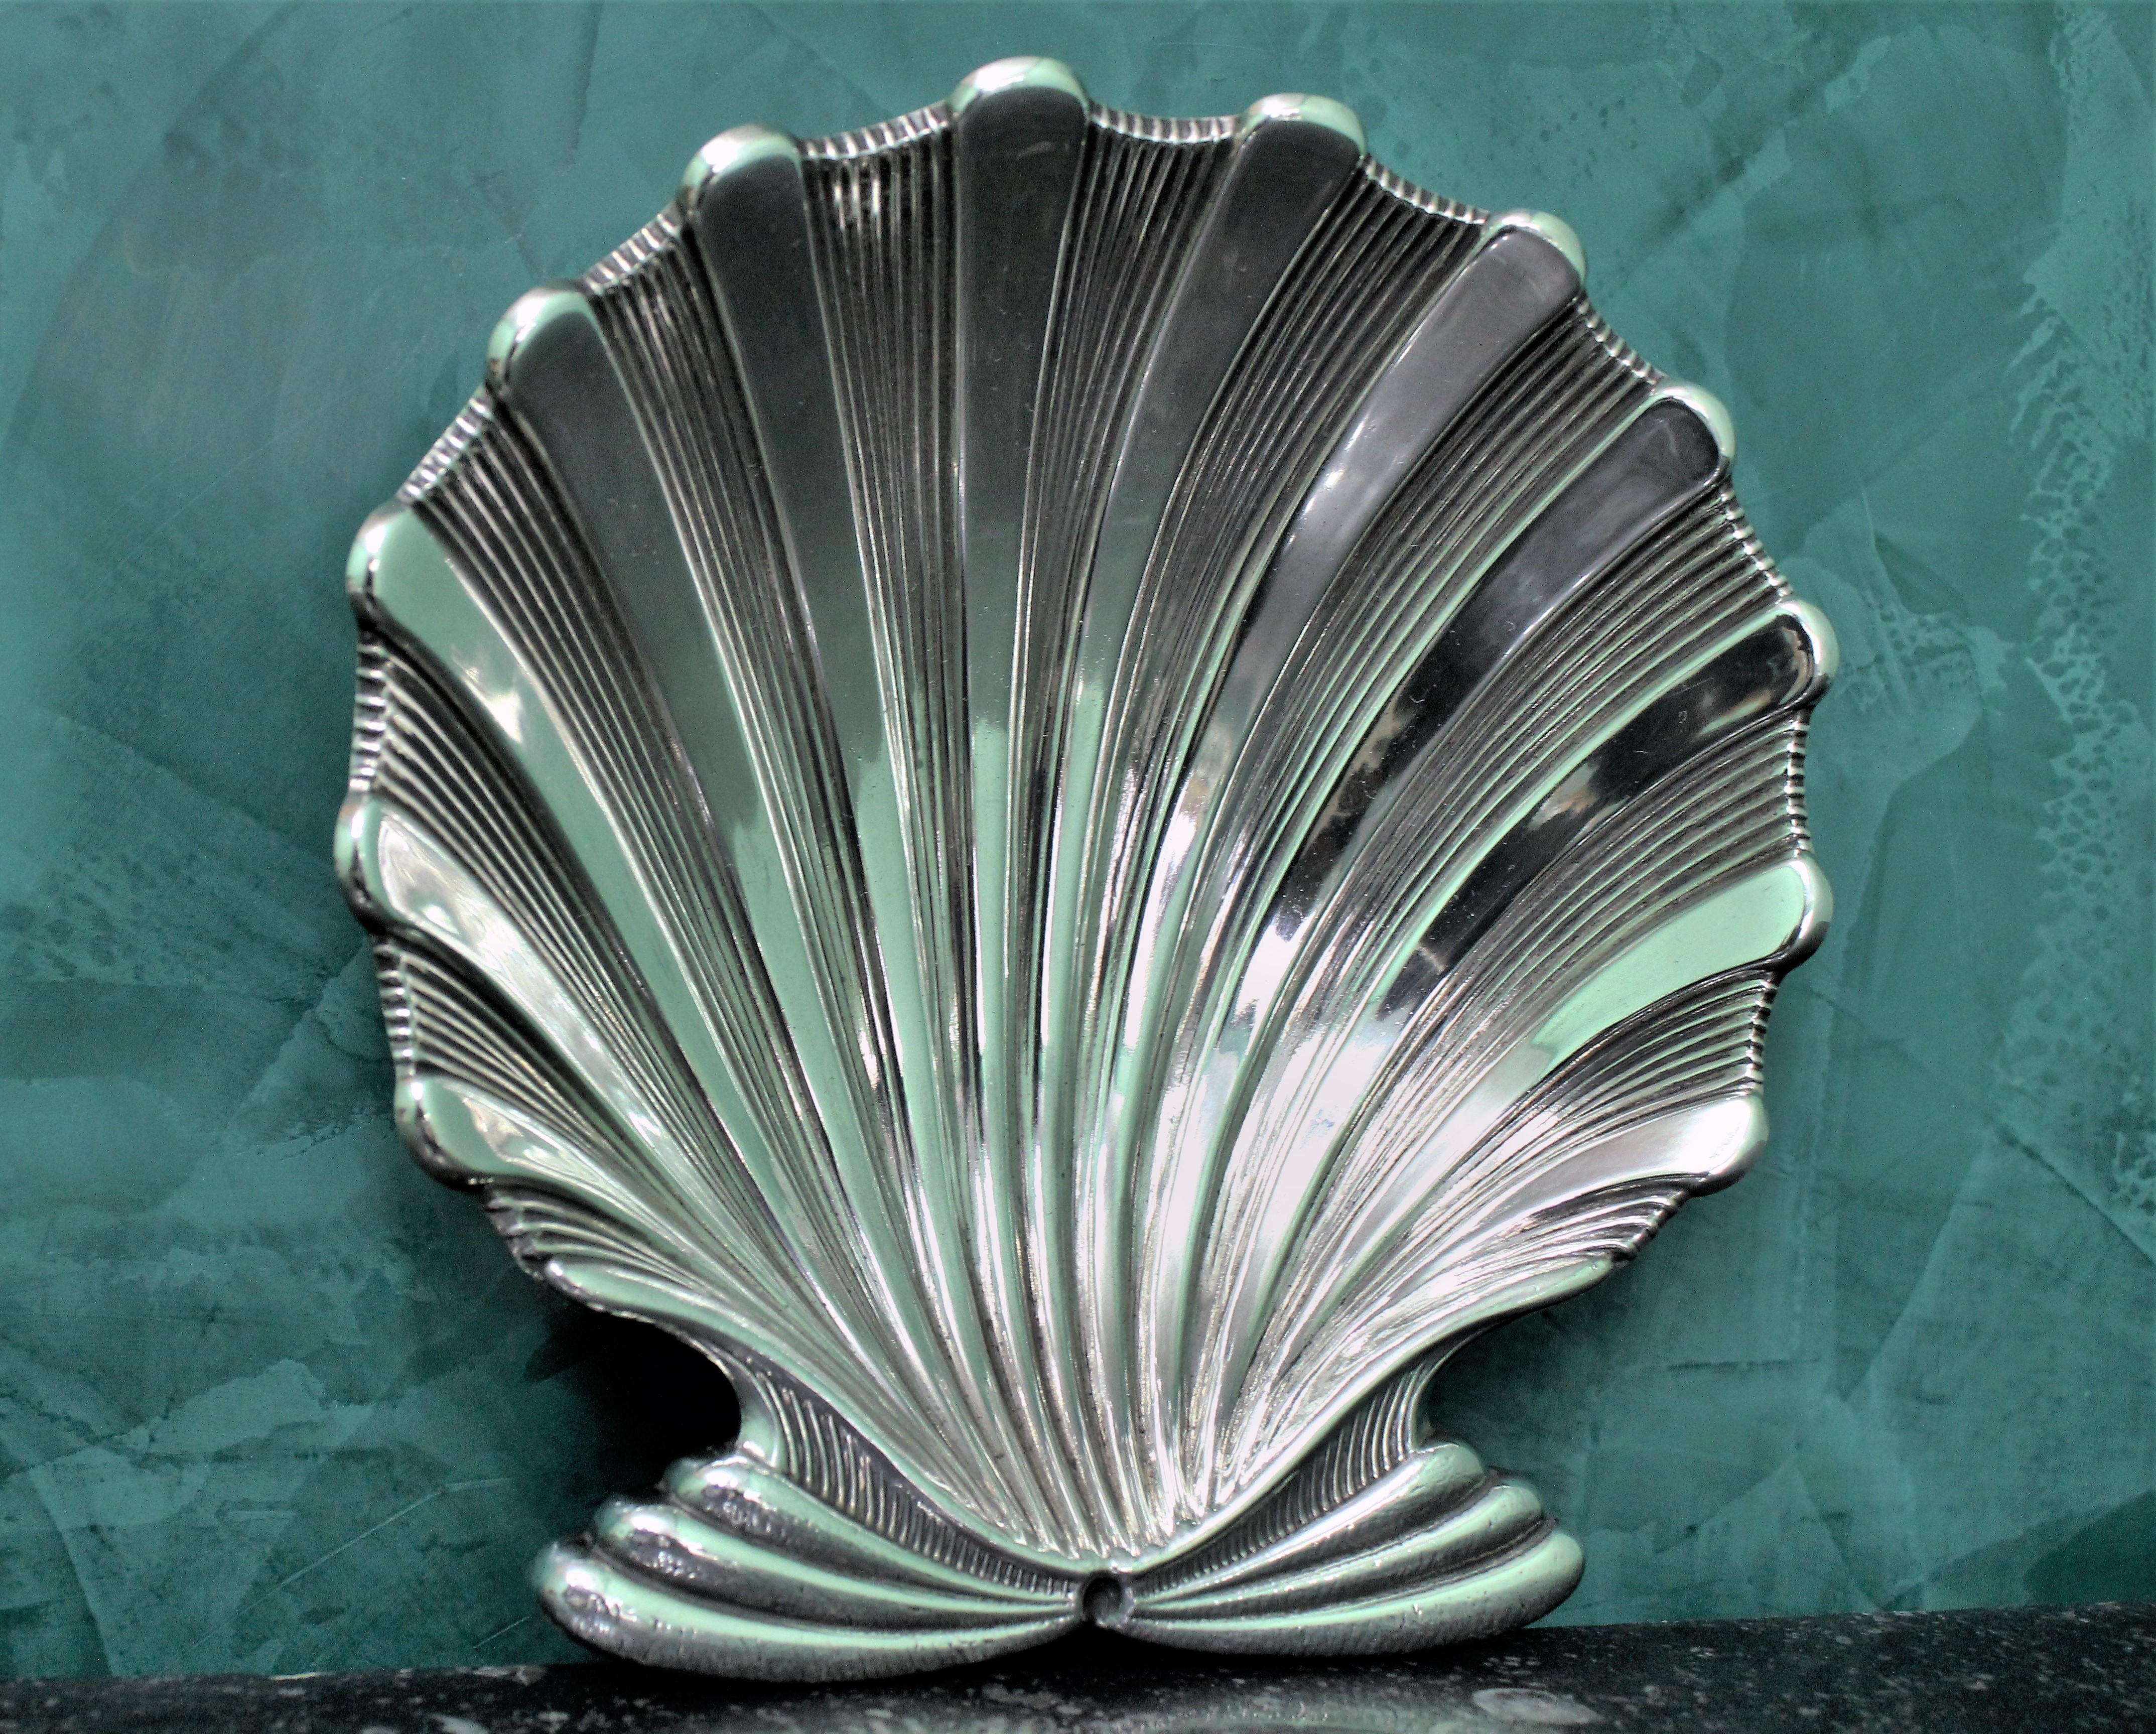 Sterling silver centrepiece shell embossed and engraved by hand with a magnificent work.
Can be used as an elegant and precious centrepiece the way it is or used as a serving plate.
Signed by Gianmaria Buccellati - Milan and realized by Clementi